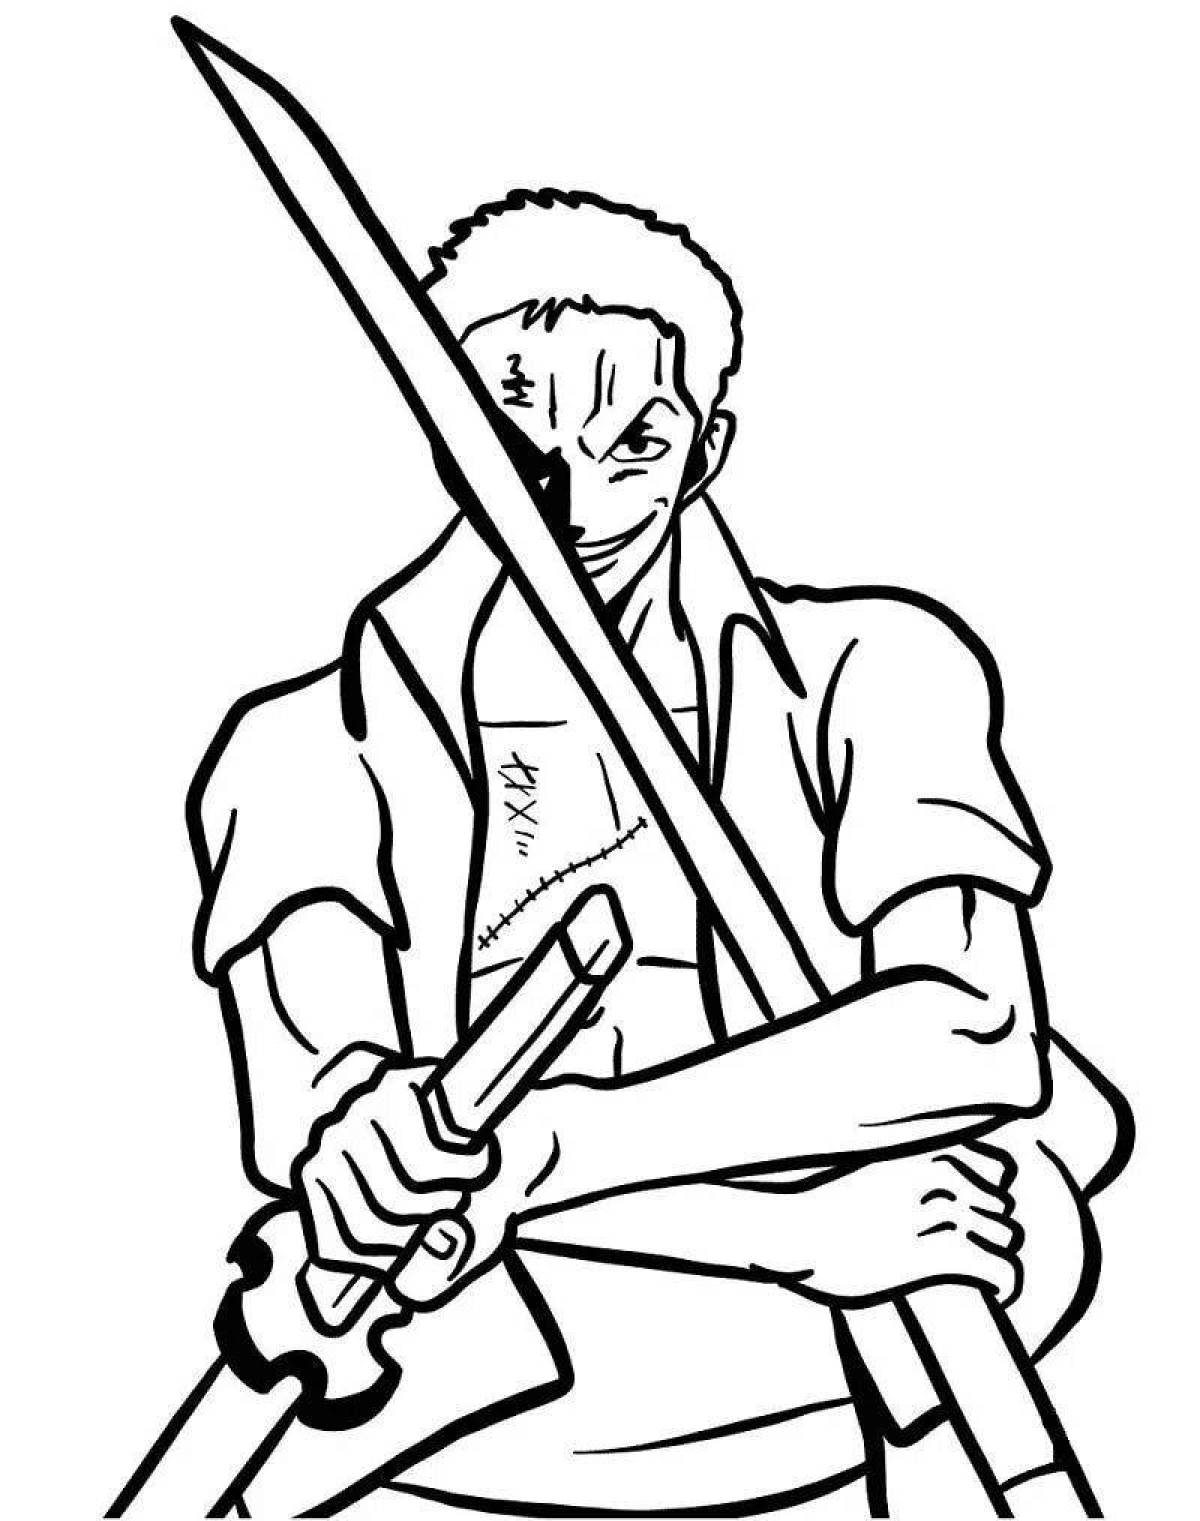 Attractive zoro one piece coloring page